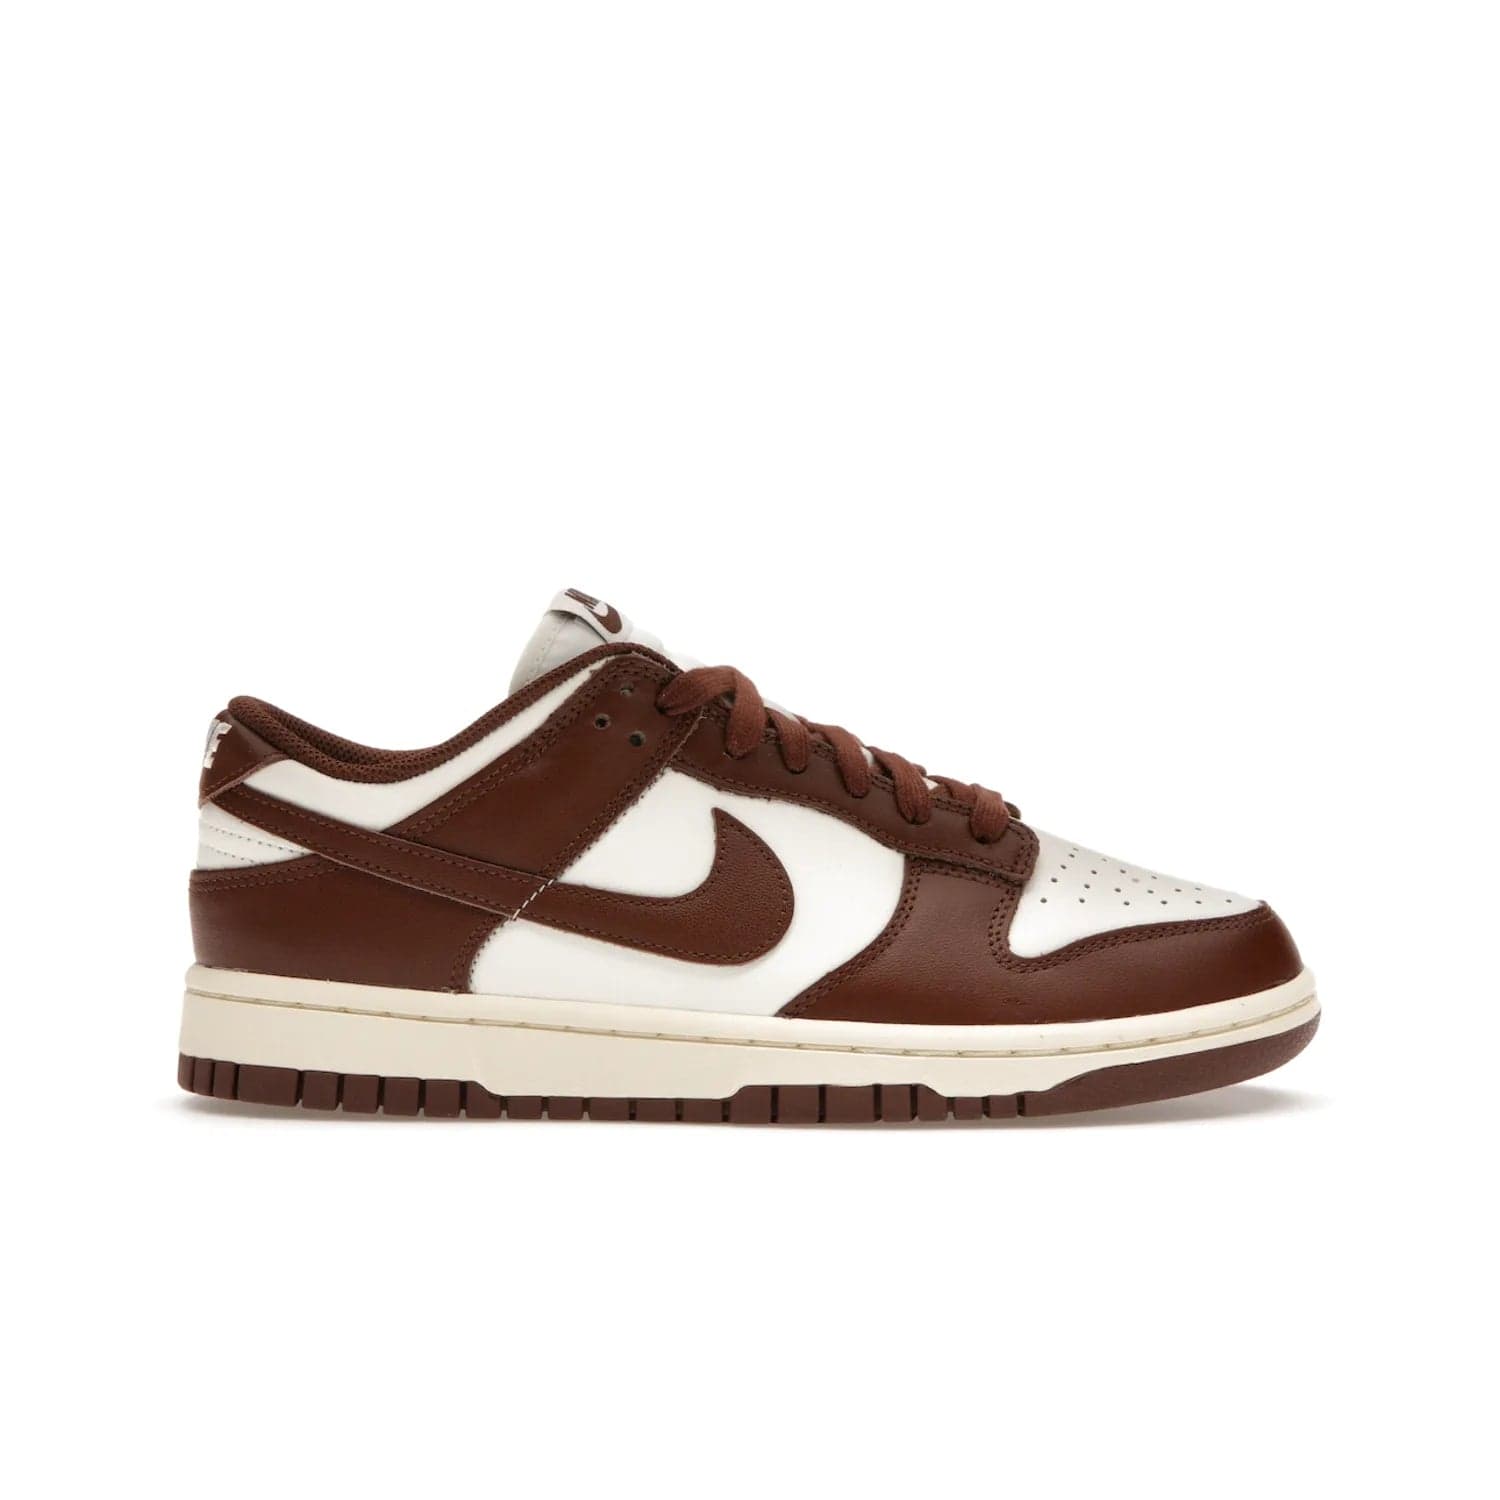 Nike Dunk Low Cacao Wow (Women's) - Image 1 - Only at www.BallersClubKickz.com - Revised
Get the Nike Dunk Low Cacao Wow and make a statement! Plush leather and a cool Cacao Wow finish bring together a unique mix of comfort and fashion that will turn heads. Boosted with a Coconut Milk hue. Shop today.